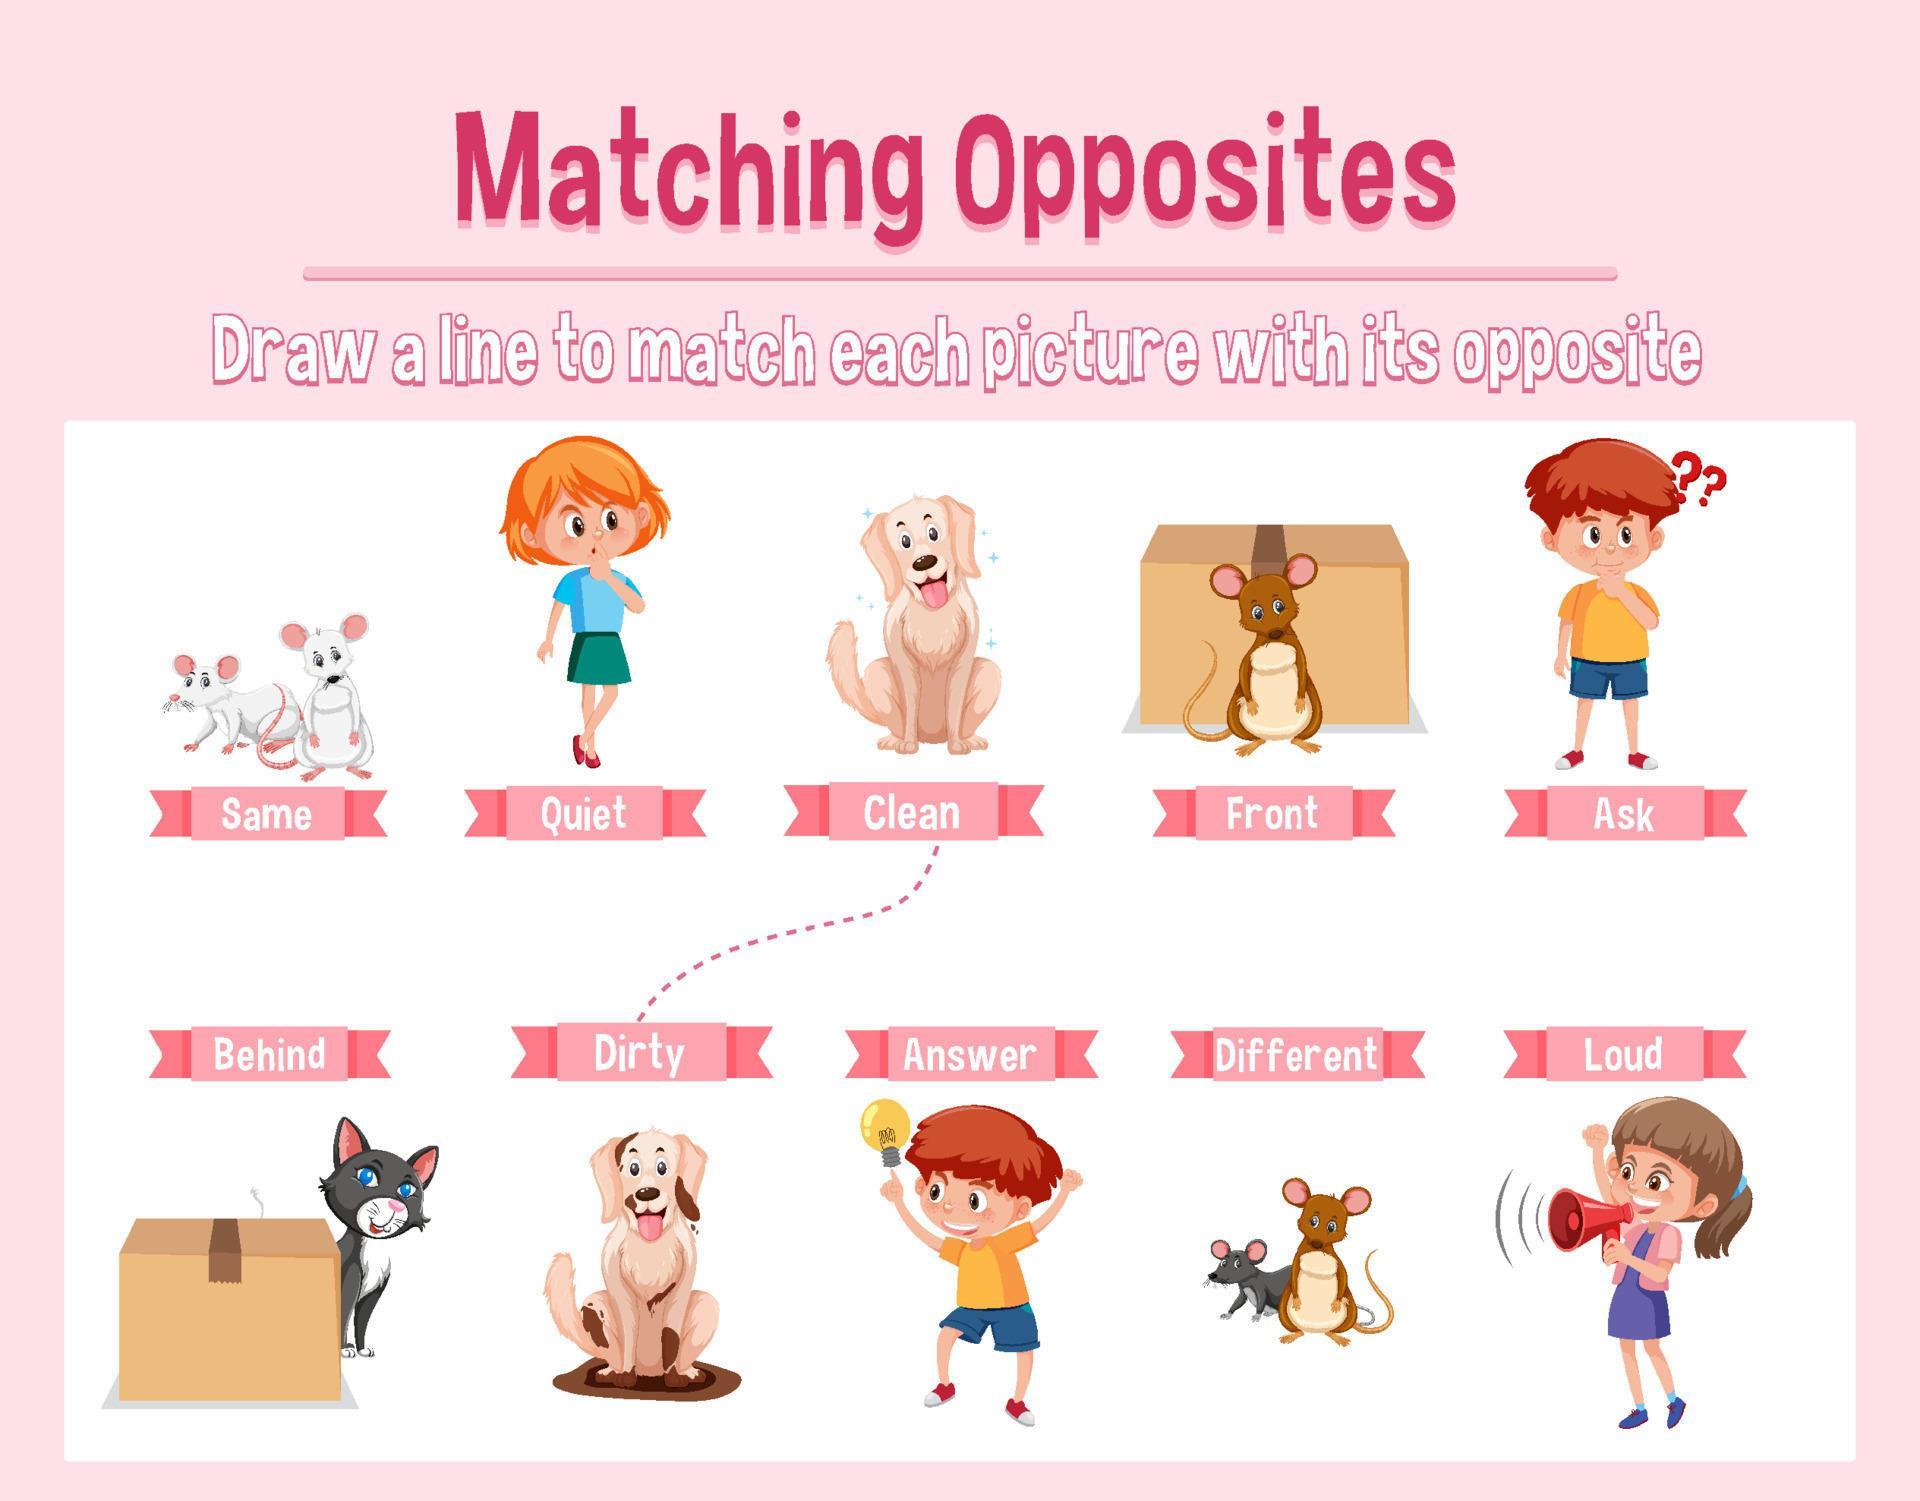 Match the opposites 5